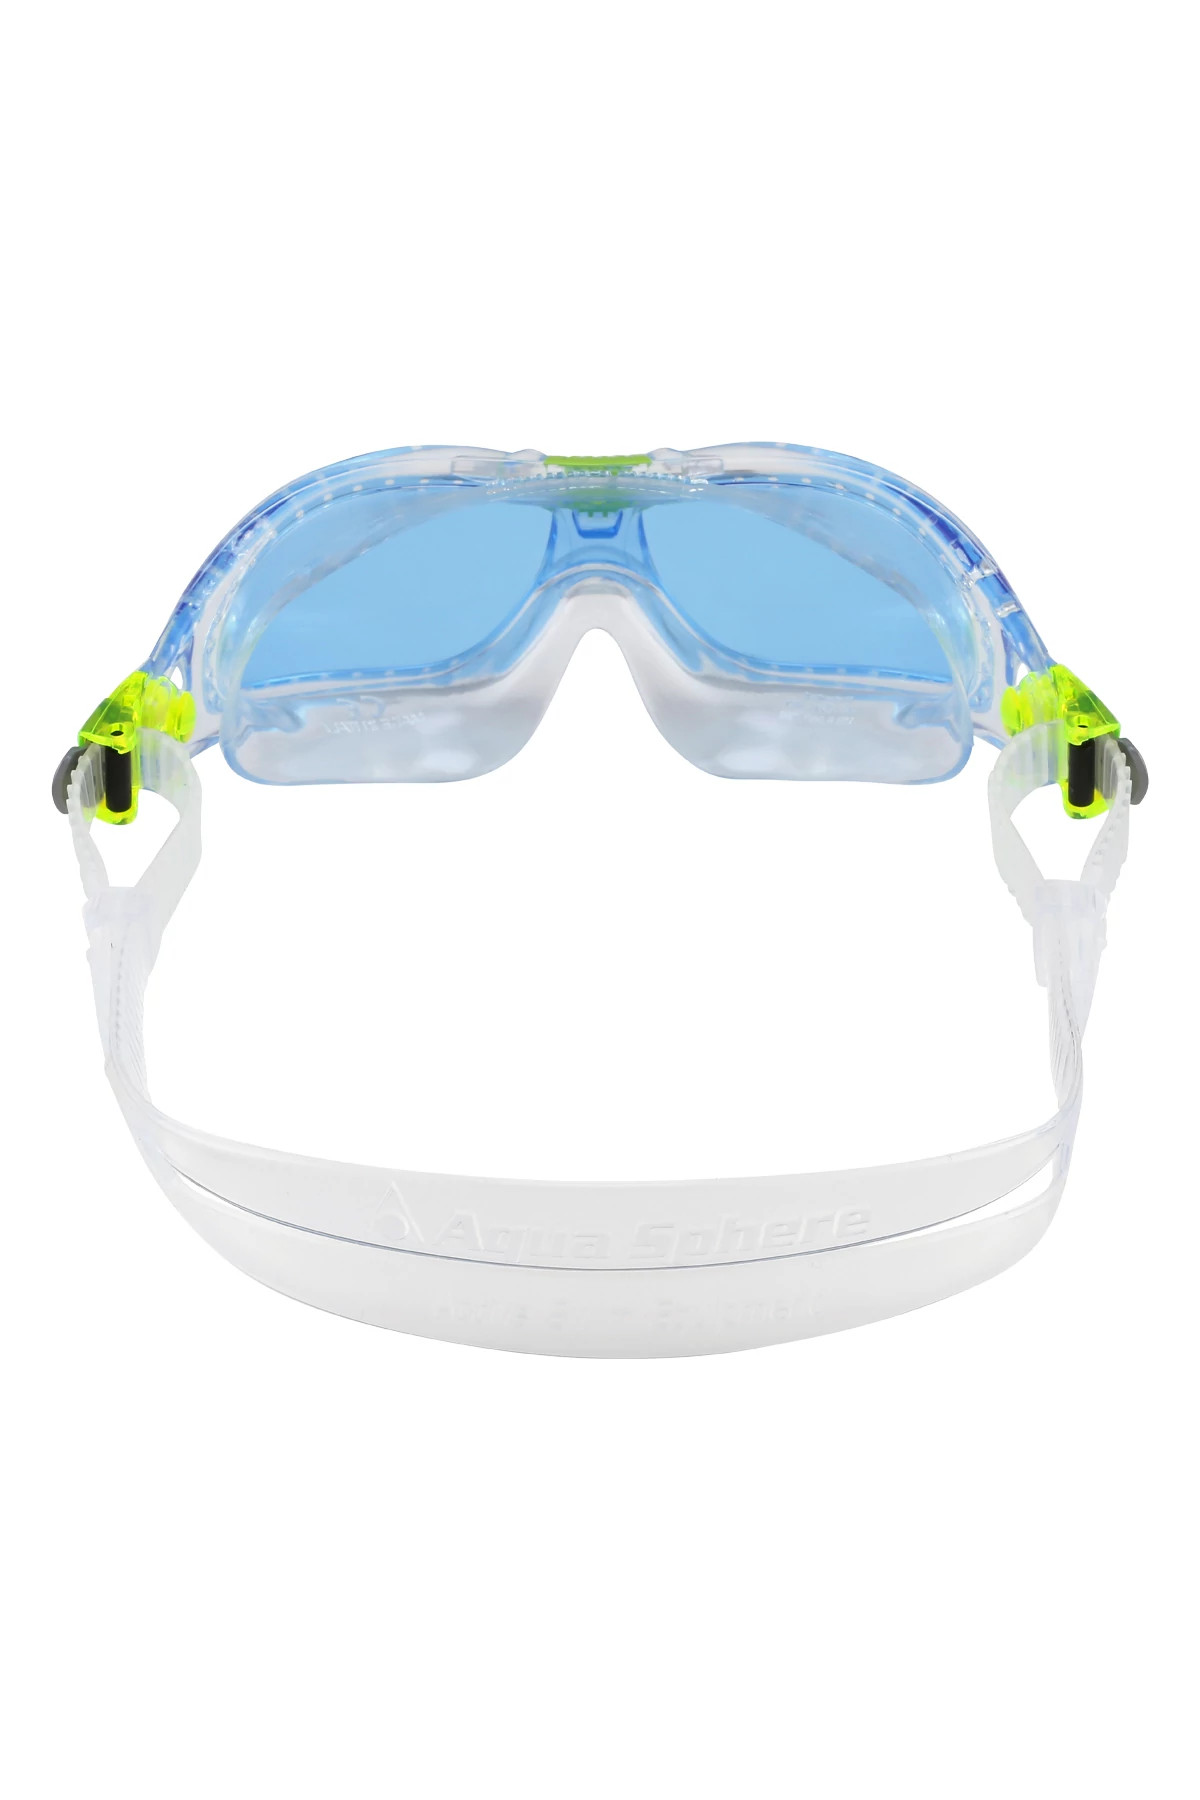 CLEAR/LIME Seal Kid Swim Goggles image number 3